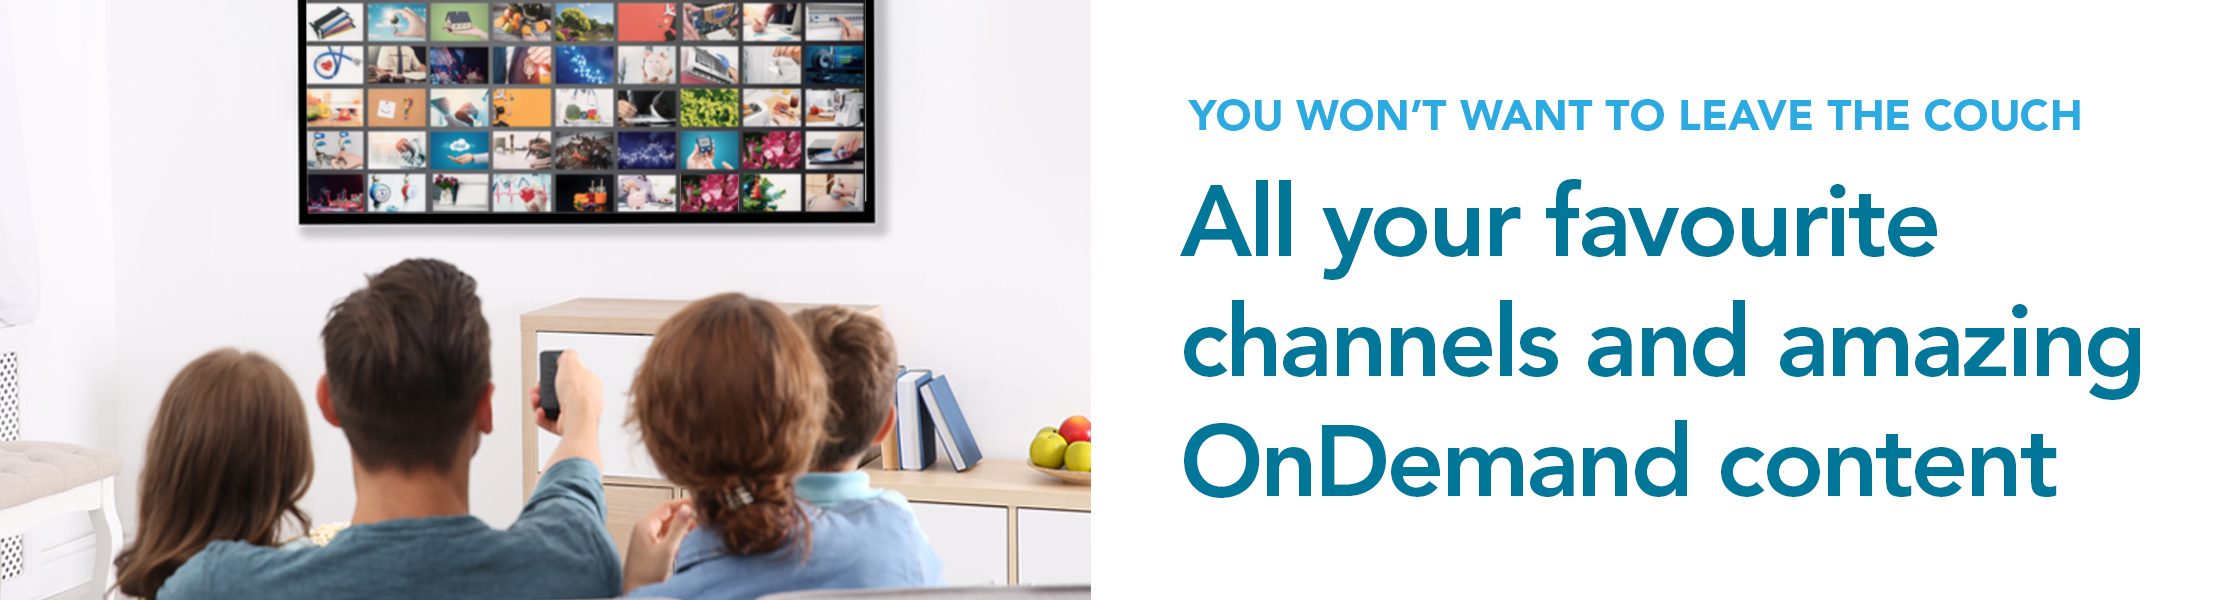 All your favourite channels and OnDemand content